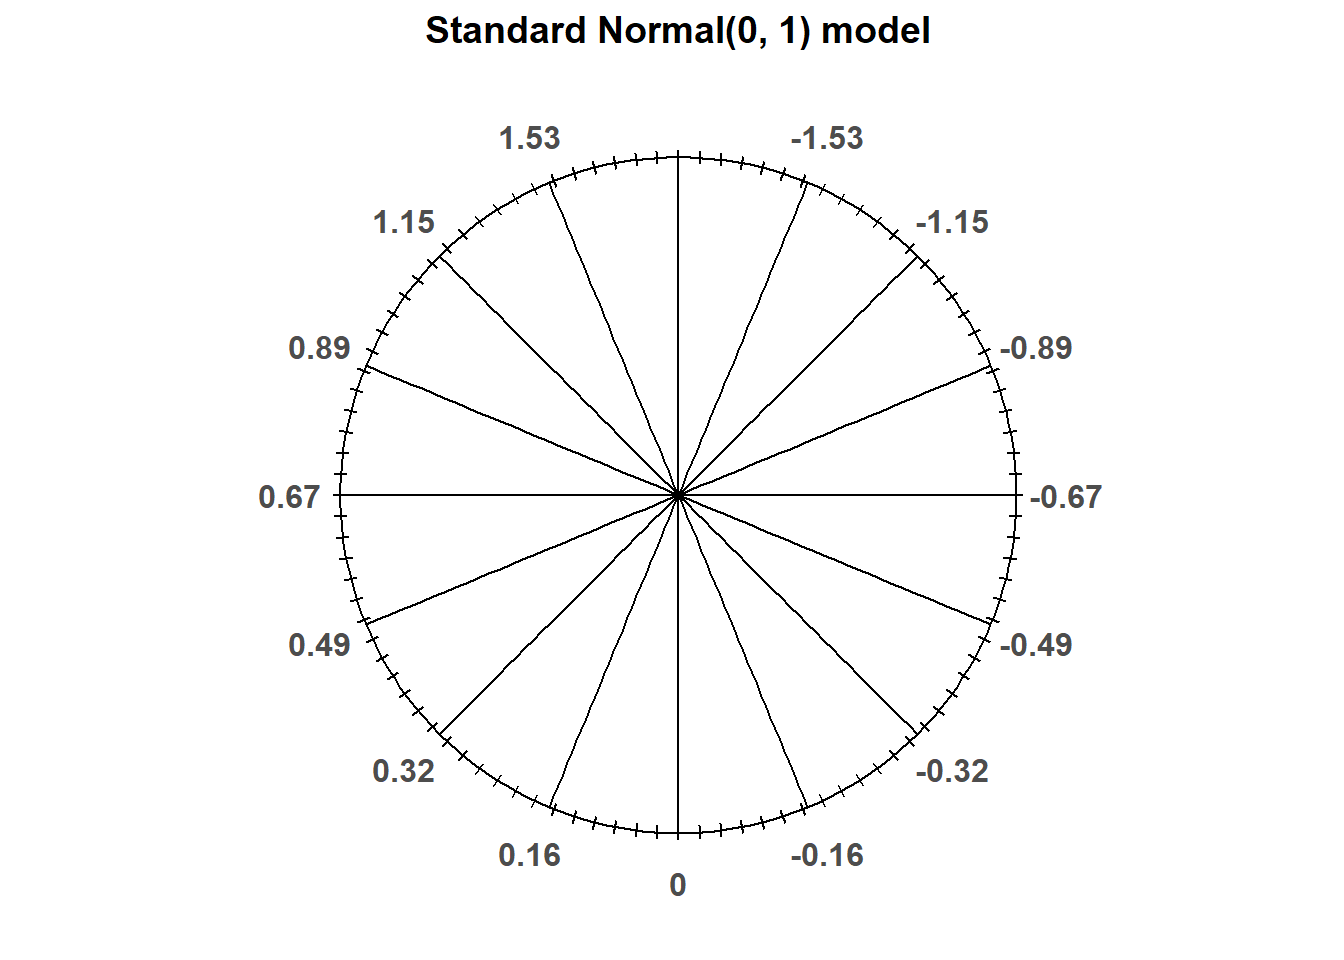 A “standard” Normal(0, 1) spinner. The same spinner is displayed on both sides, with different features highlighted on the left and right. Only selected rounded values are displayed, but in the idealized model the spinner is infinitely precise so that any real number is a possible outcome. Notice that the values on the axis are not evenly spaced.